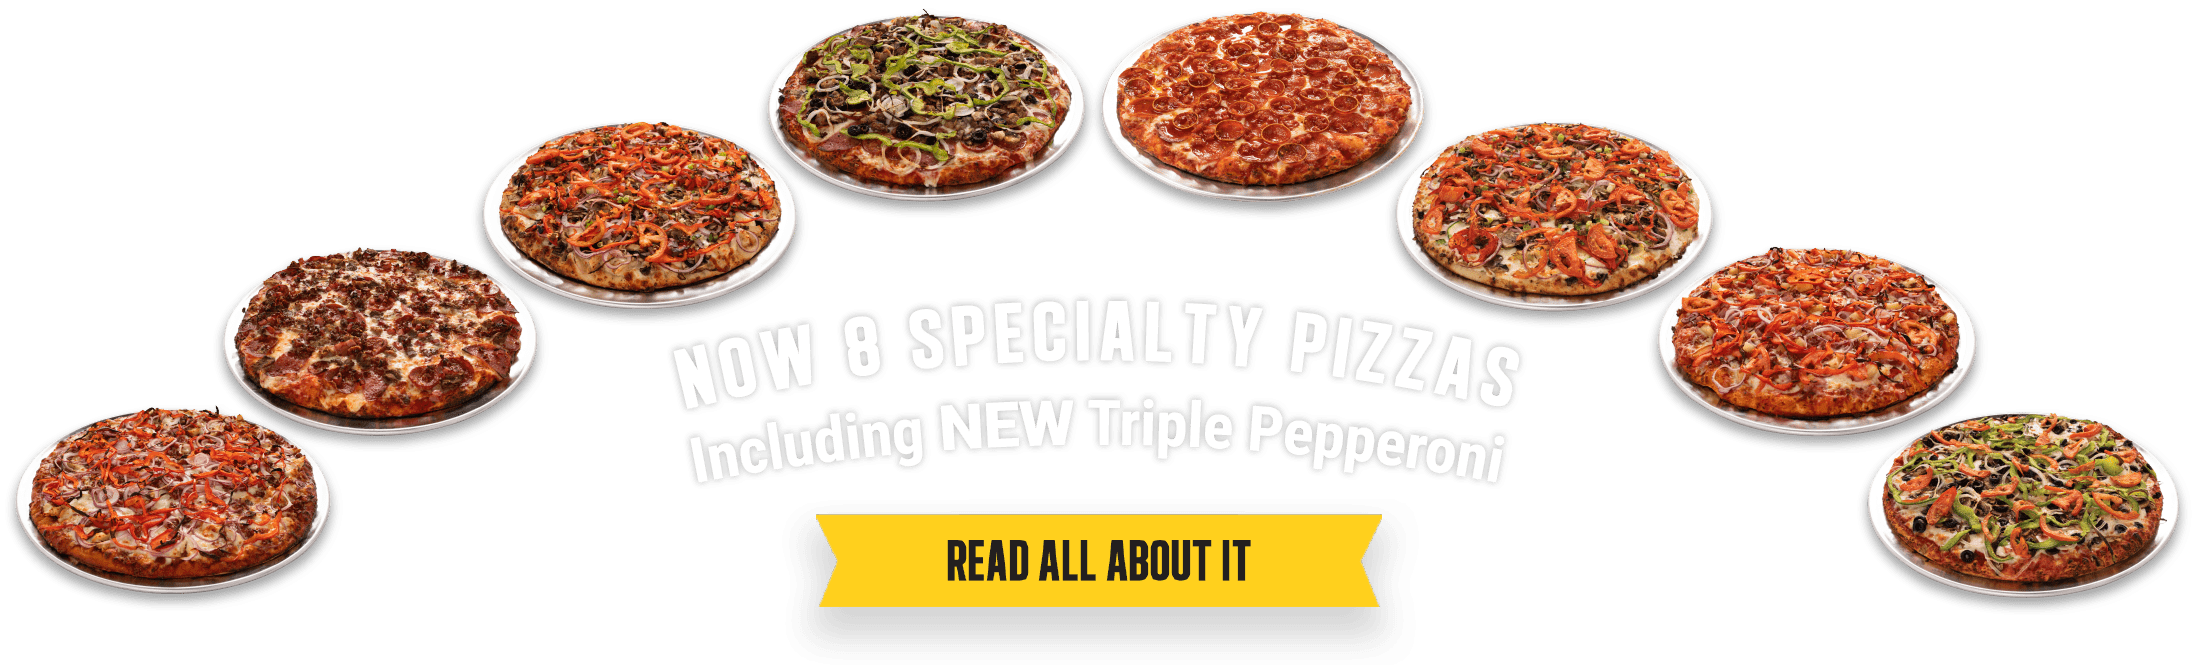 8 Specialty pizzas makes choosing easy - read all about it!